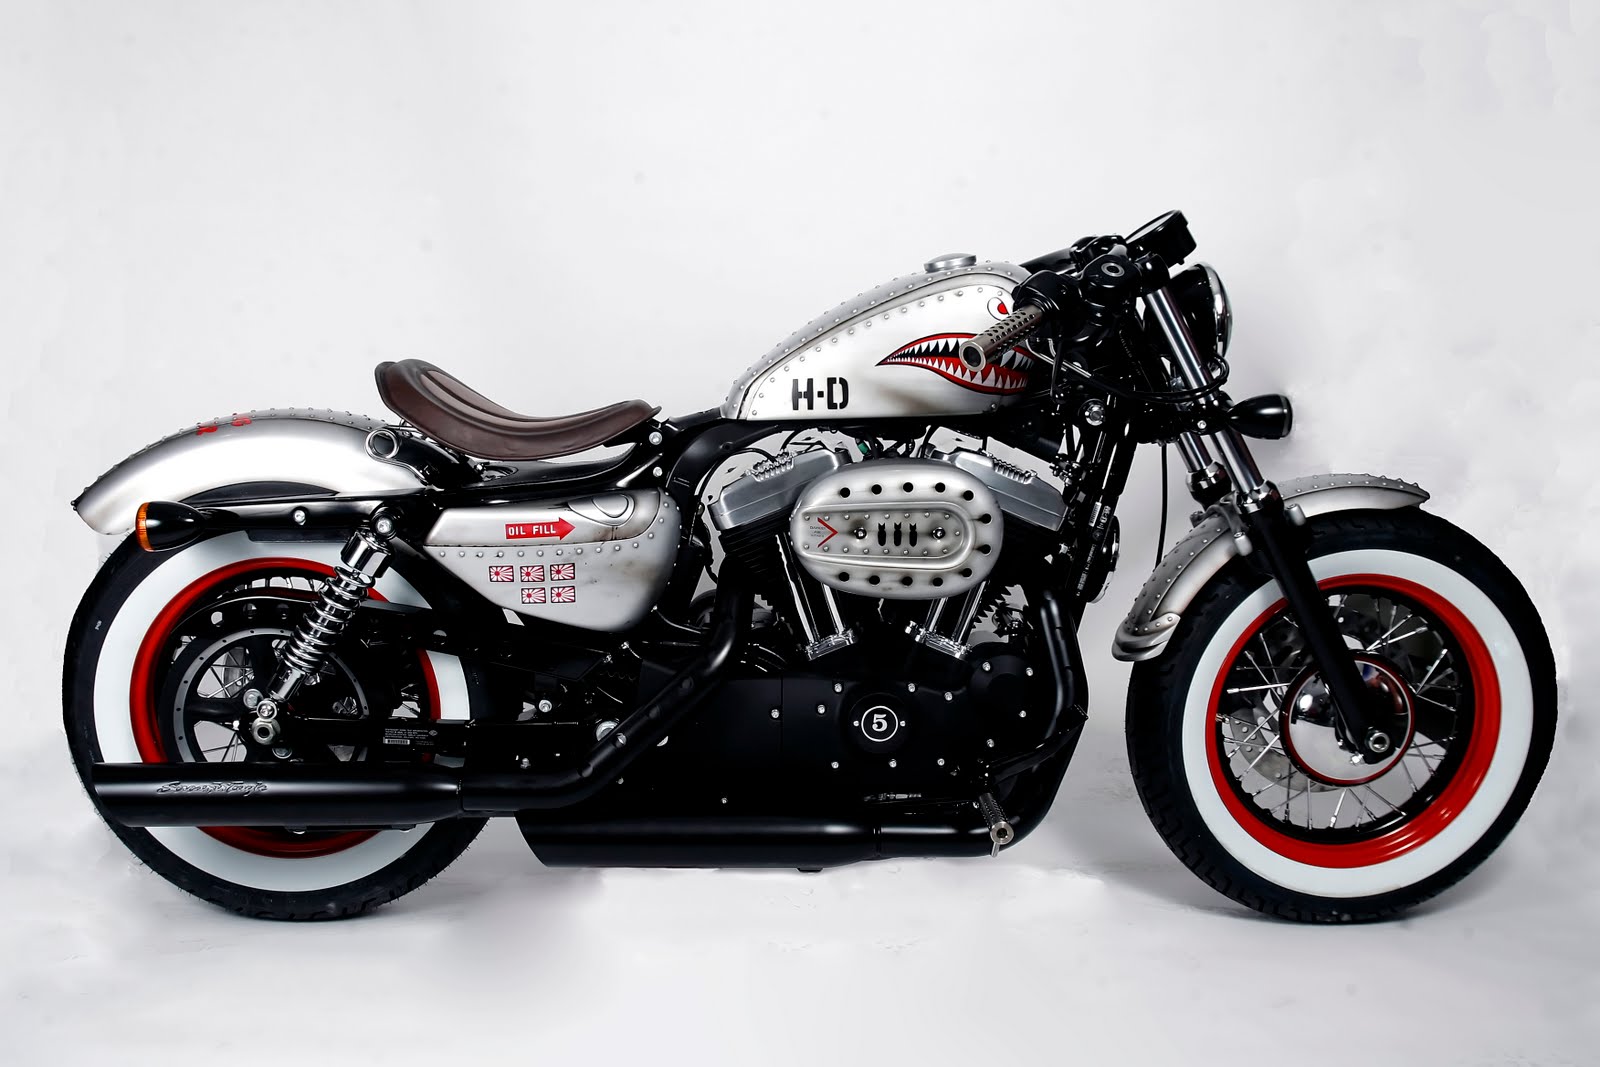 Harley Davidson 7056 Hd Wallpapers in Bikes   Imagescicom